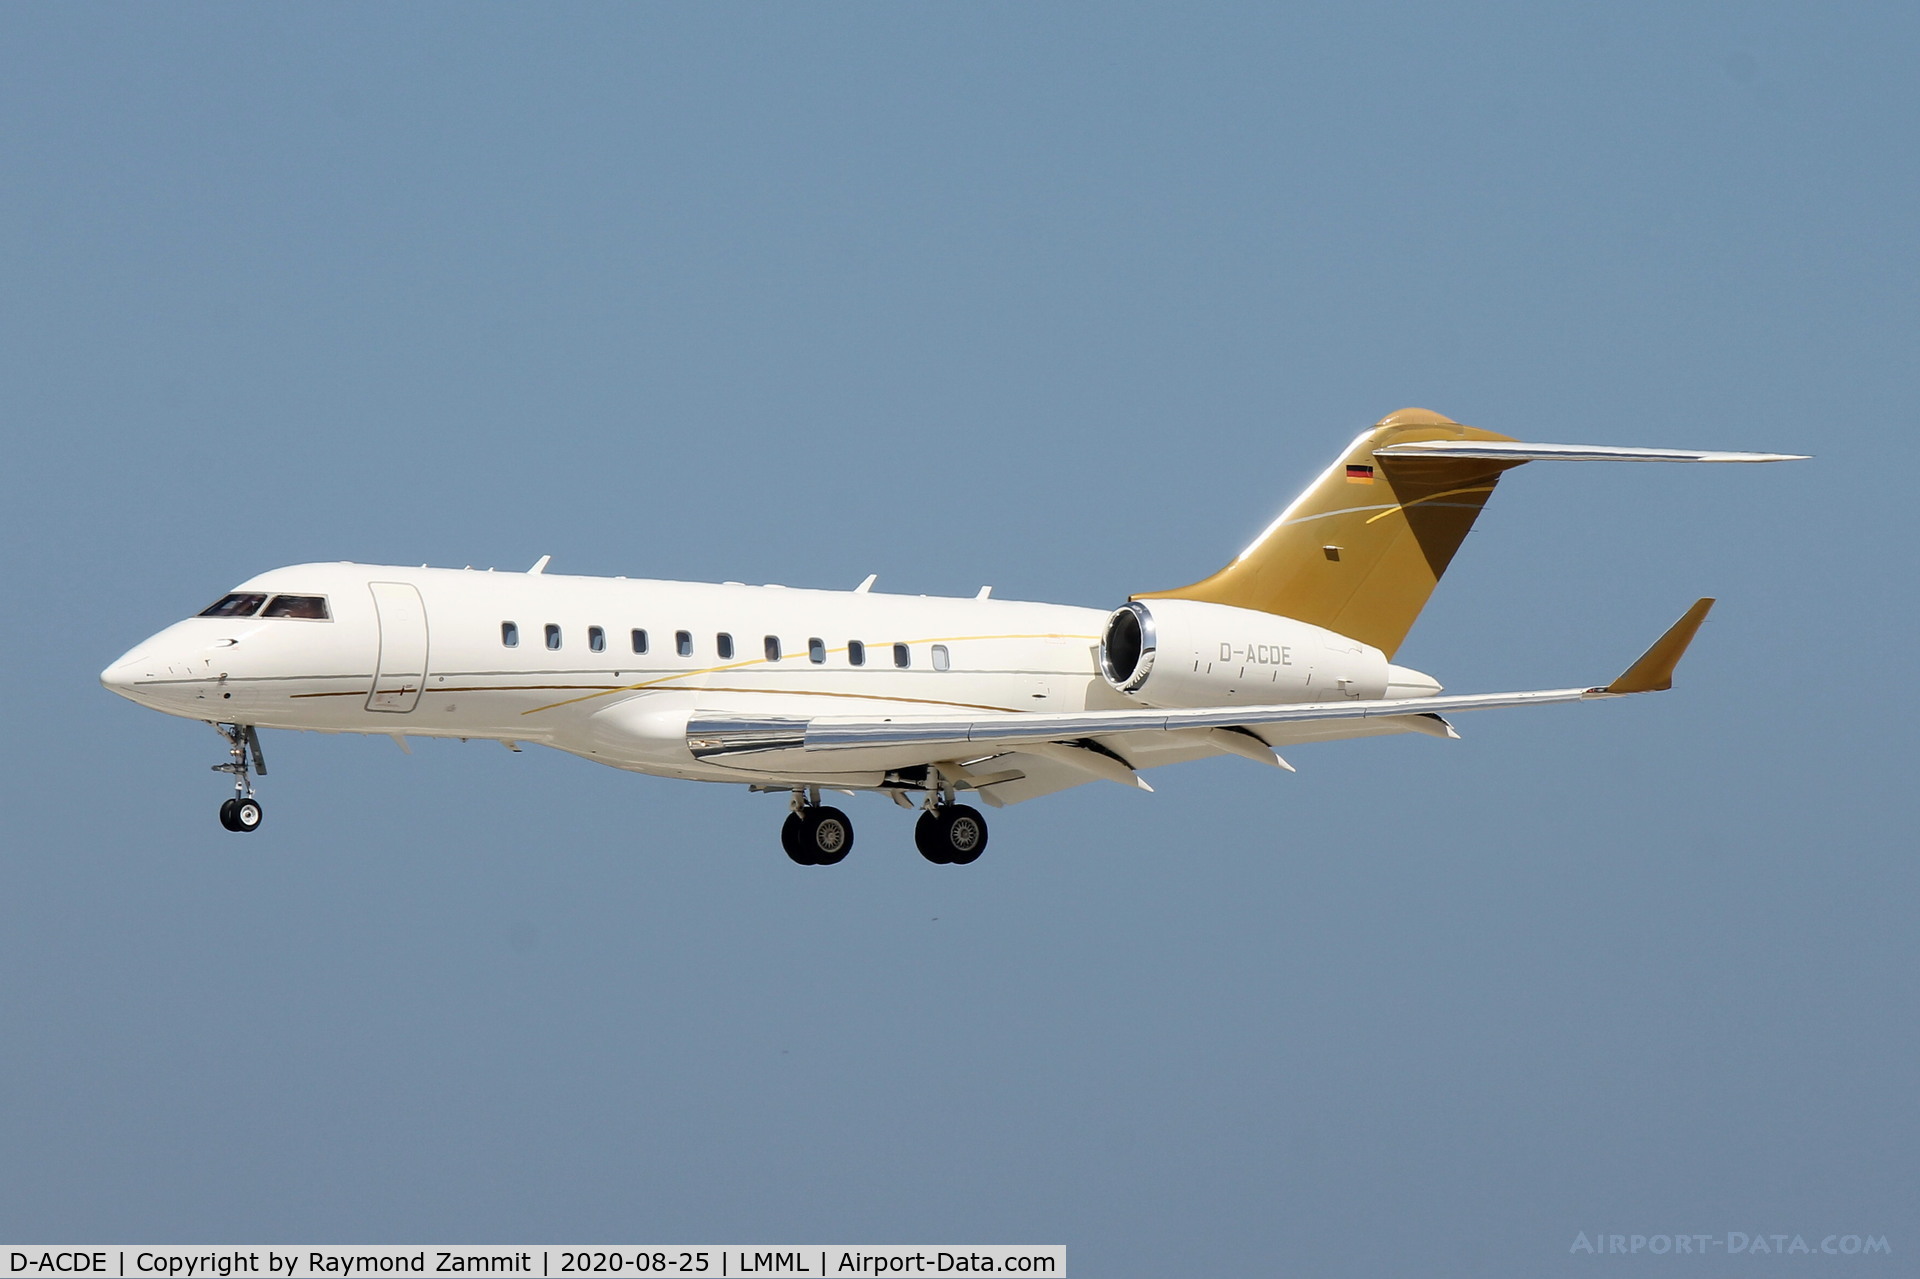 D-ACDE, 2010 Bombardier BD-700-1A11 Global Express C/N 9405, Bombardier BD-700 Global Express D-ACDE DC Aviation